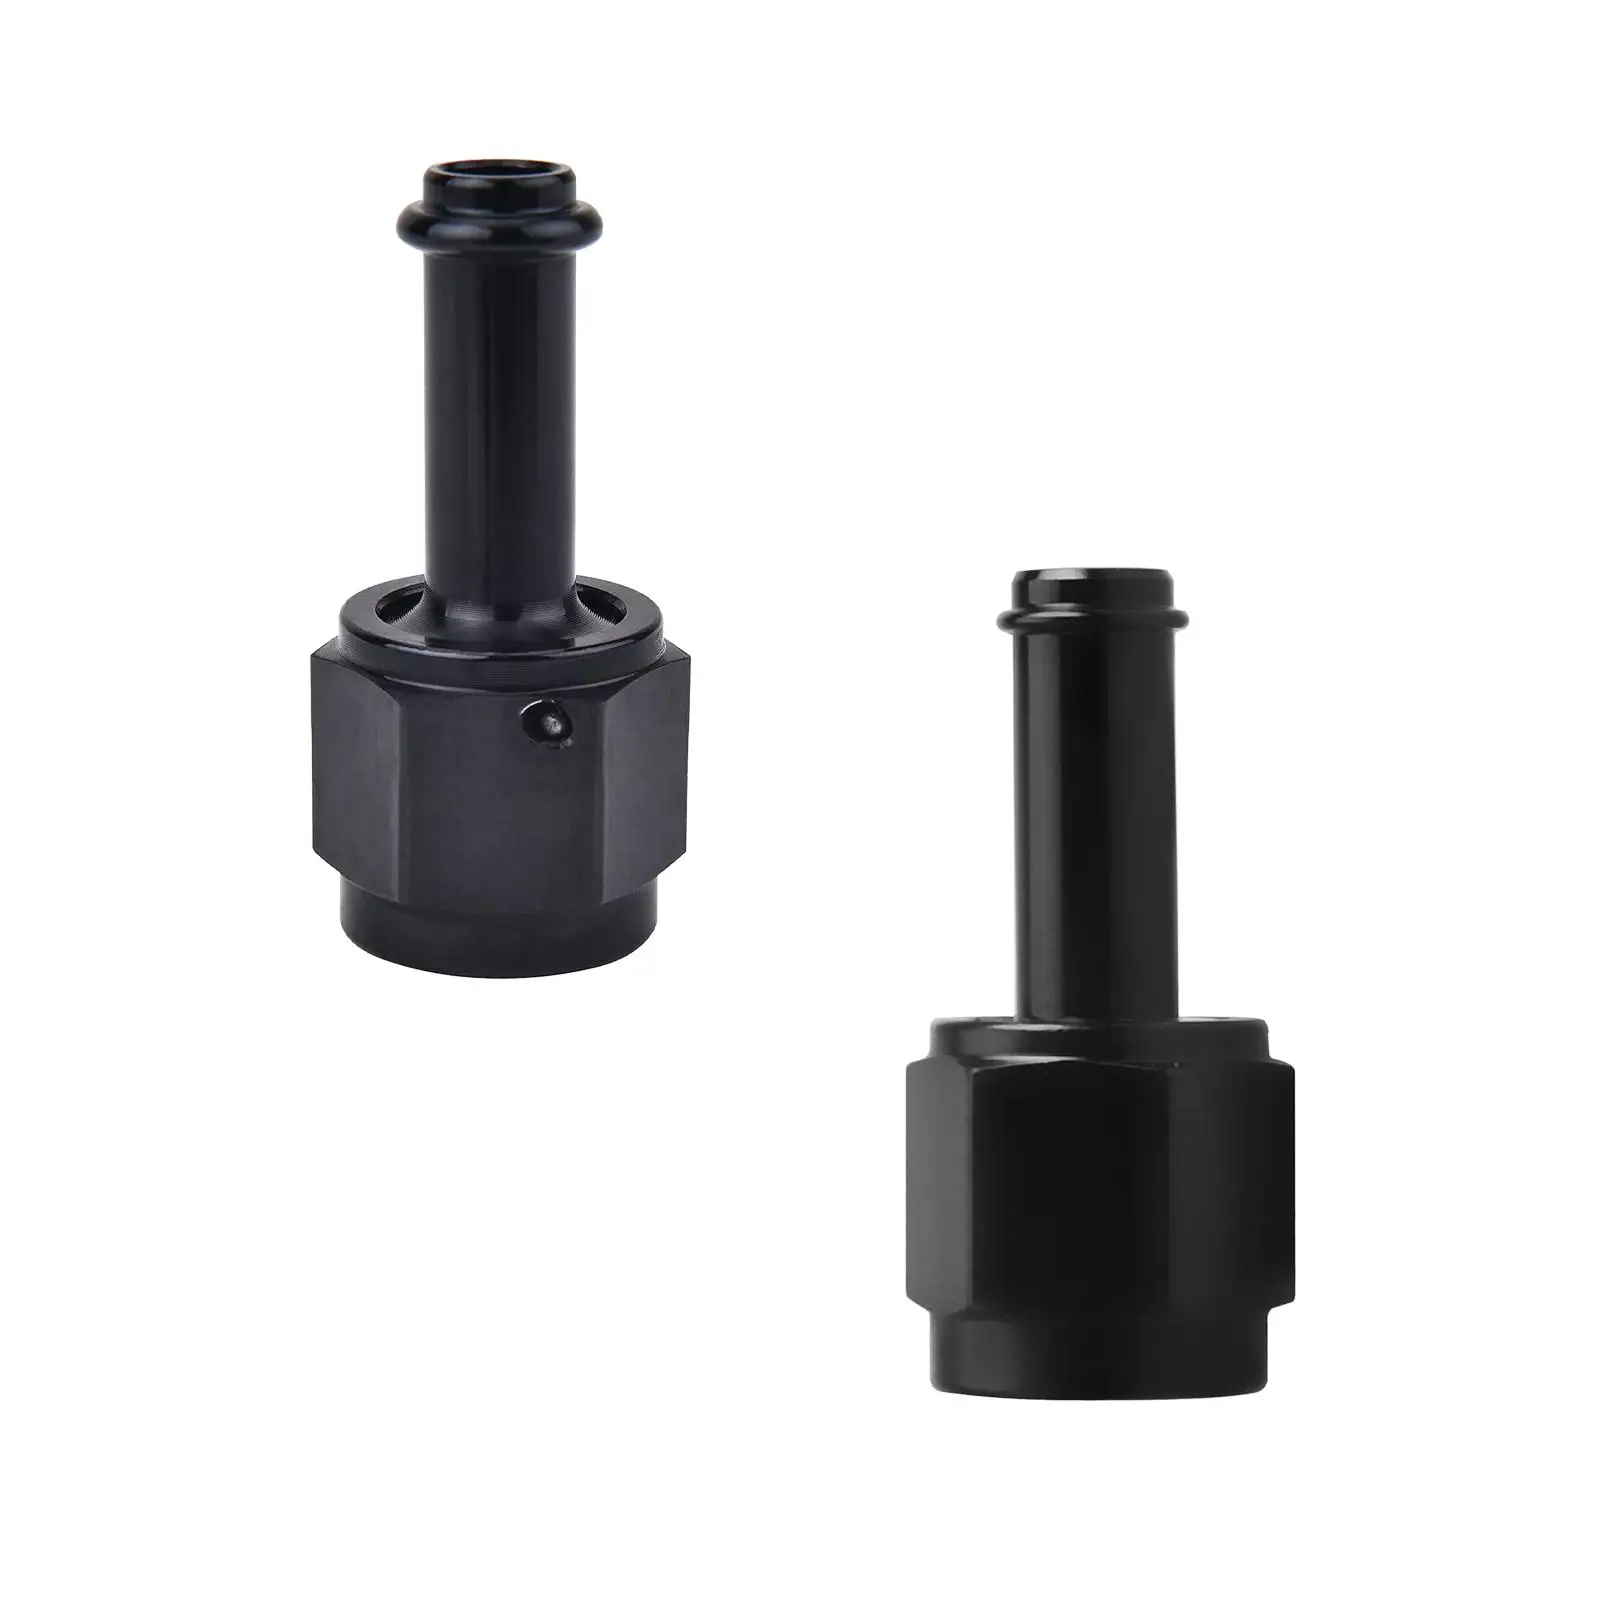 6AN Female Swivel Barb Fitting Aluminum Black Part Fuel Hose Fitting Adapter